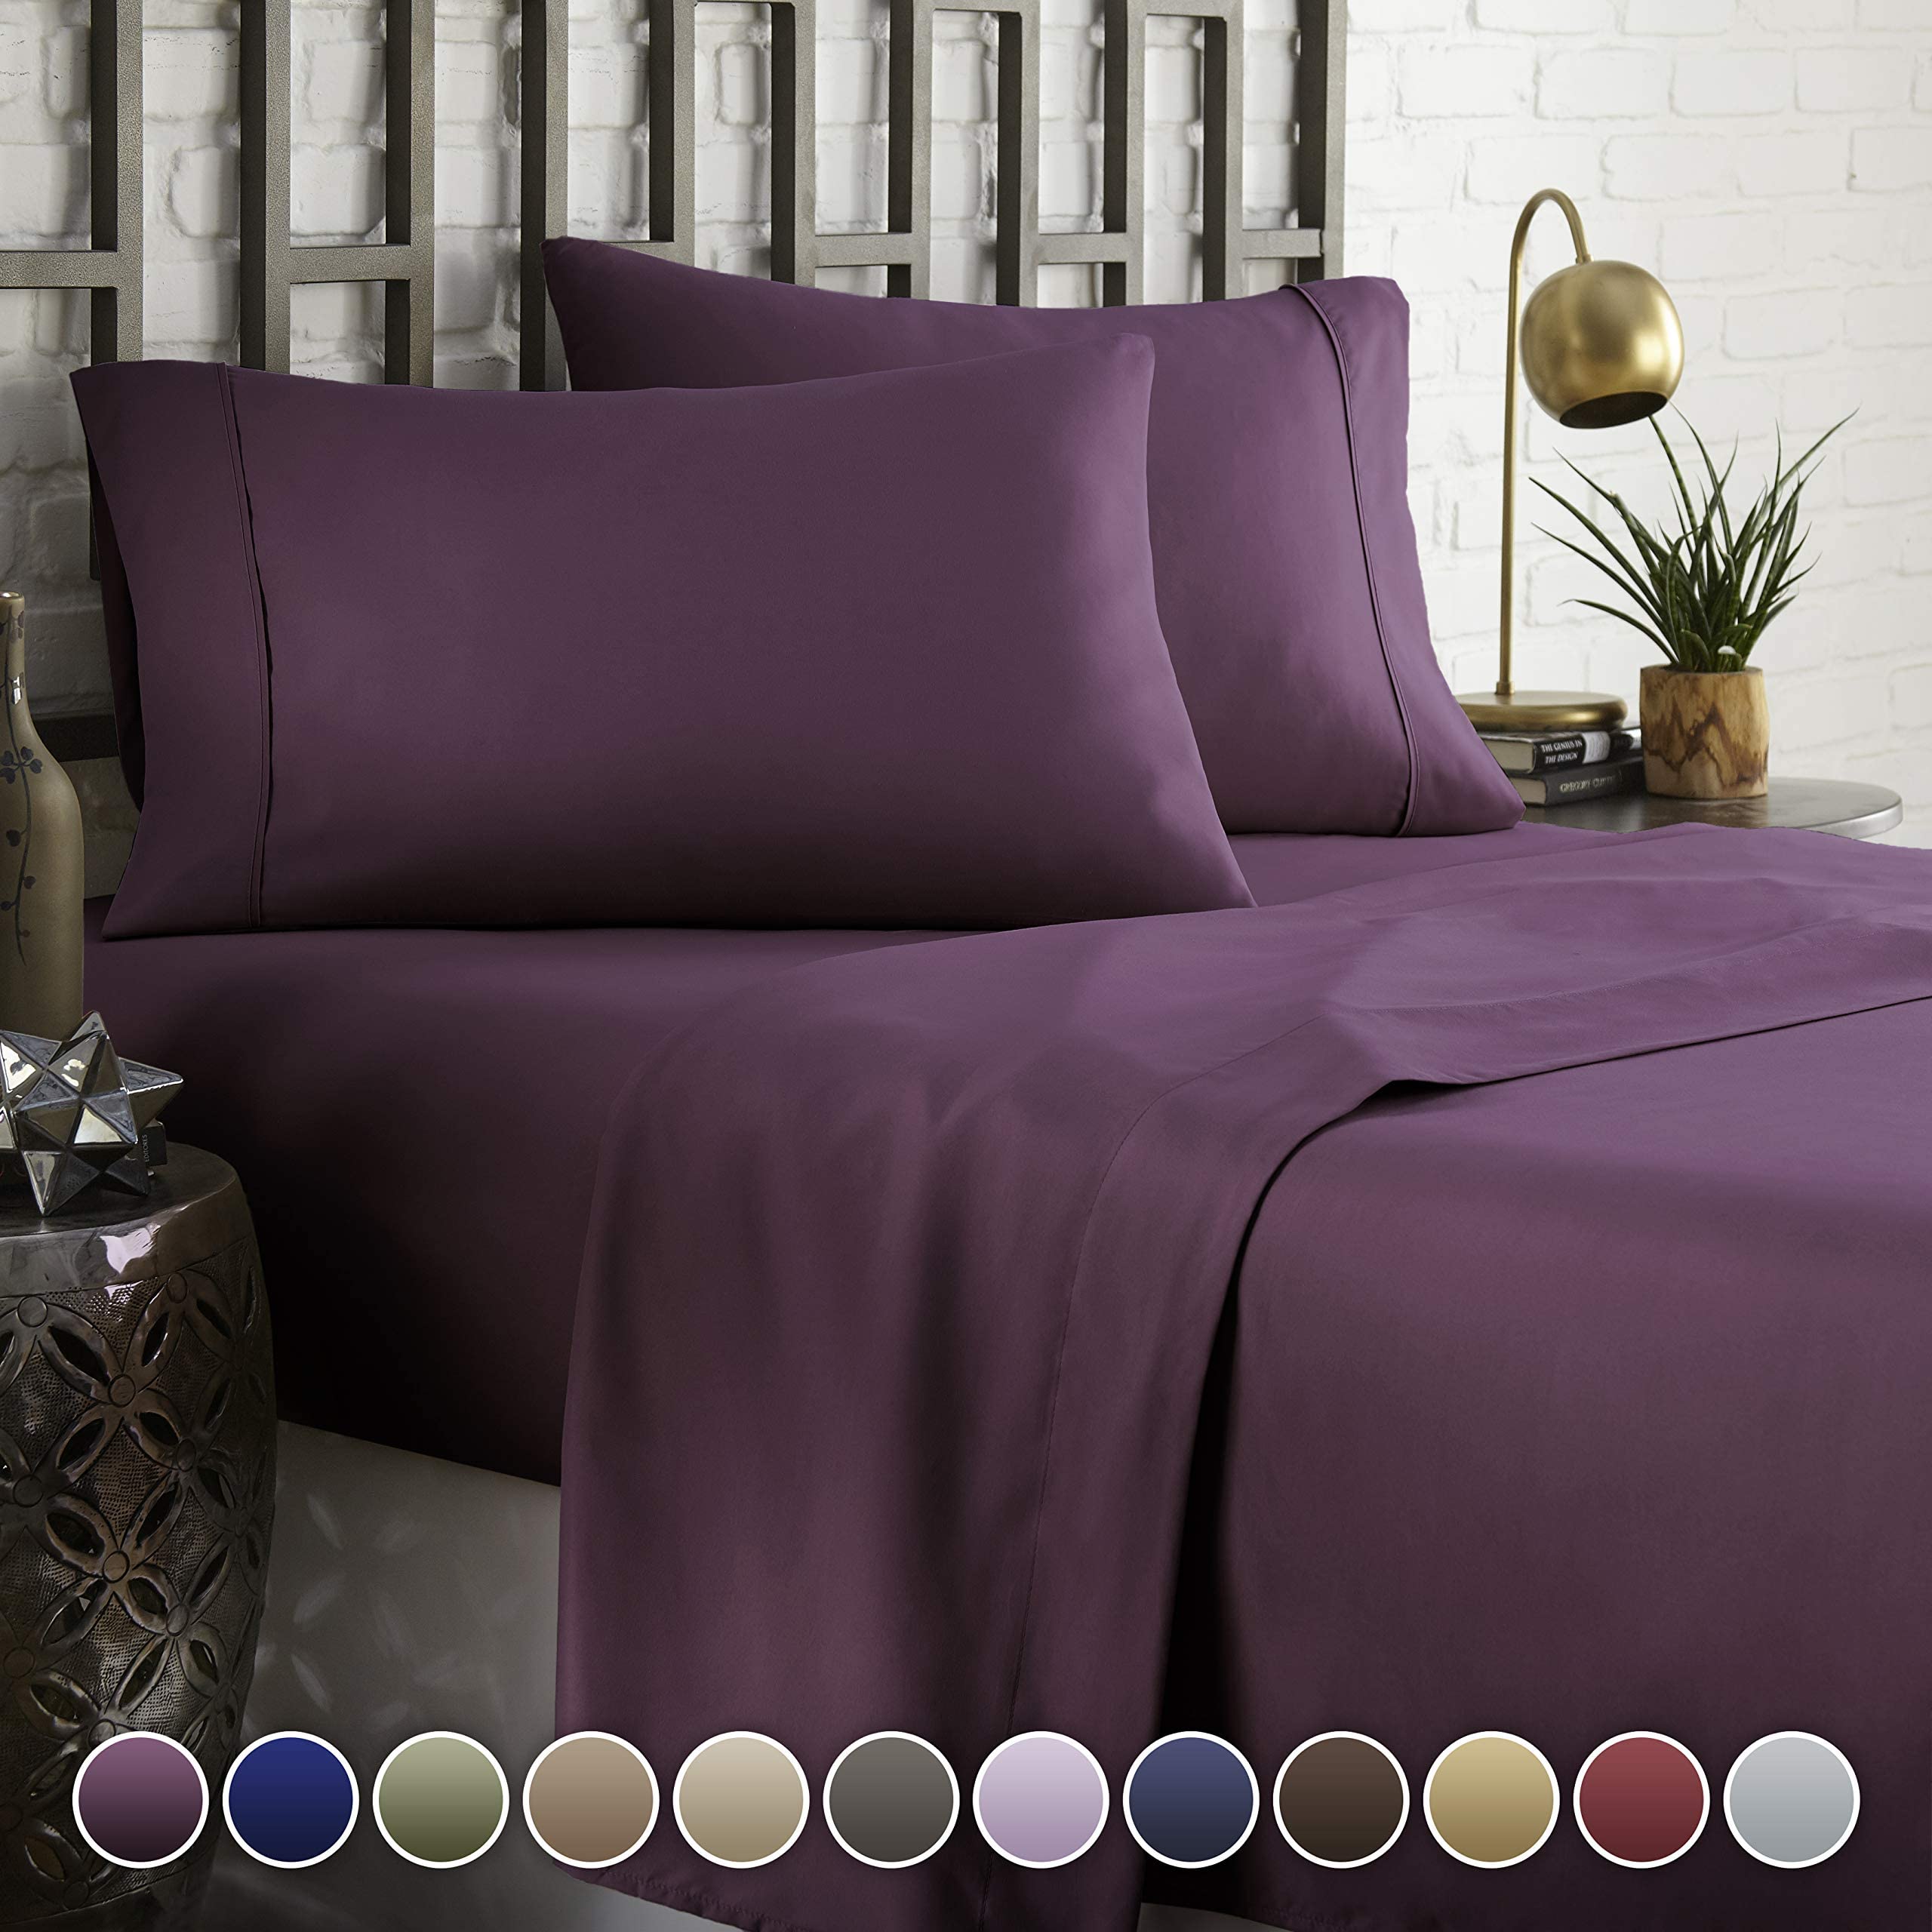 Book Cover HC COLLECTION 1800 Series Microfiber Sheet & Pillow Case Set(Full, Eggplant) Full Eggplant